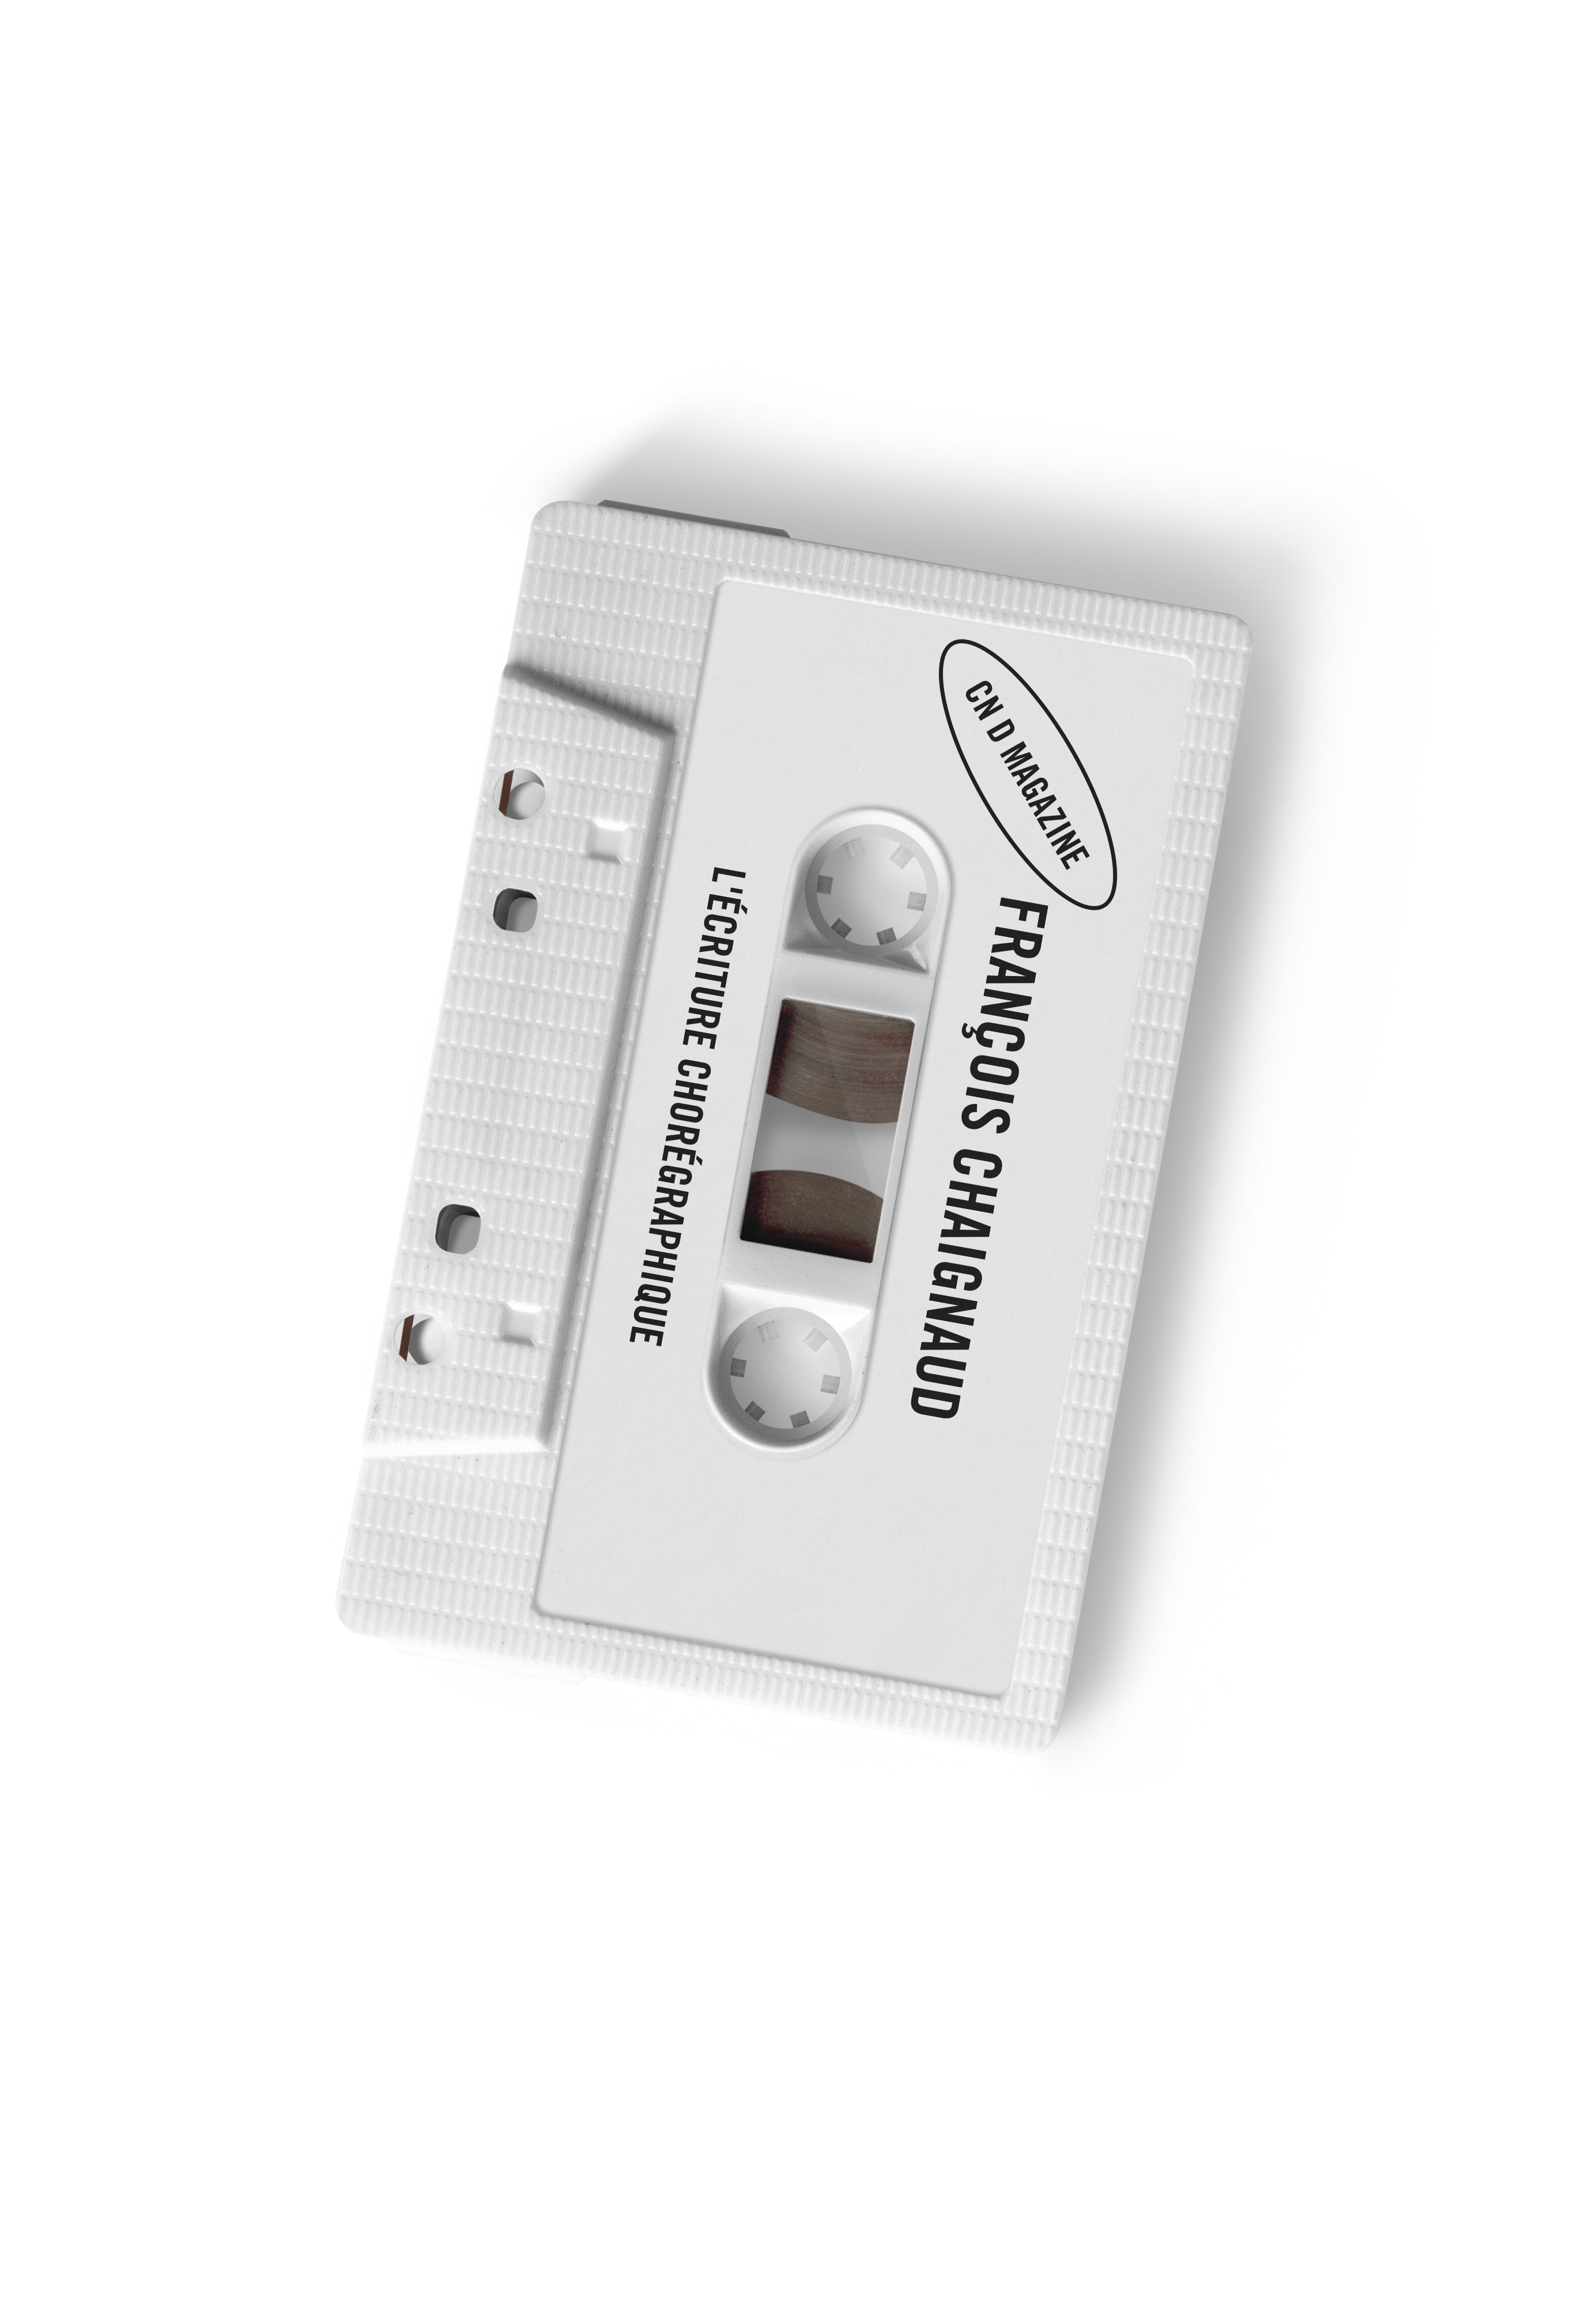 A white audio cassette with the name of François Chaignaud